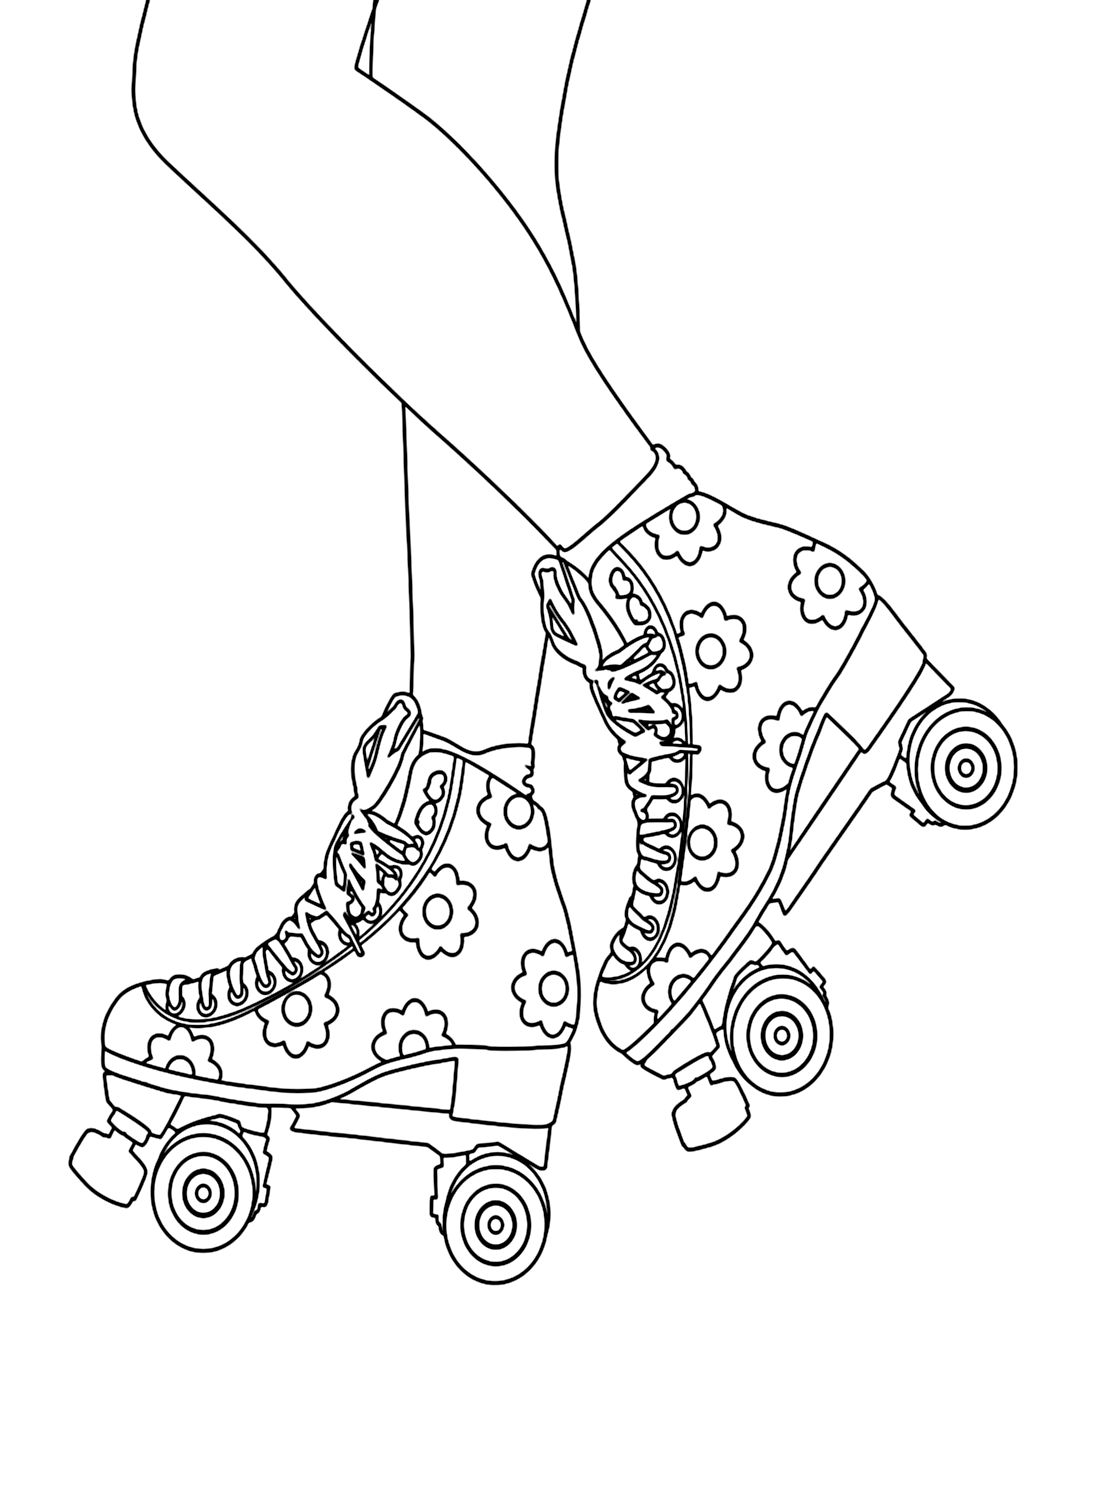 Roller skates coloring page